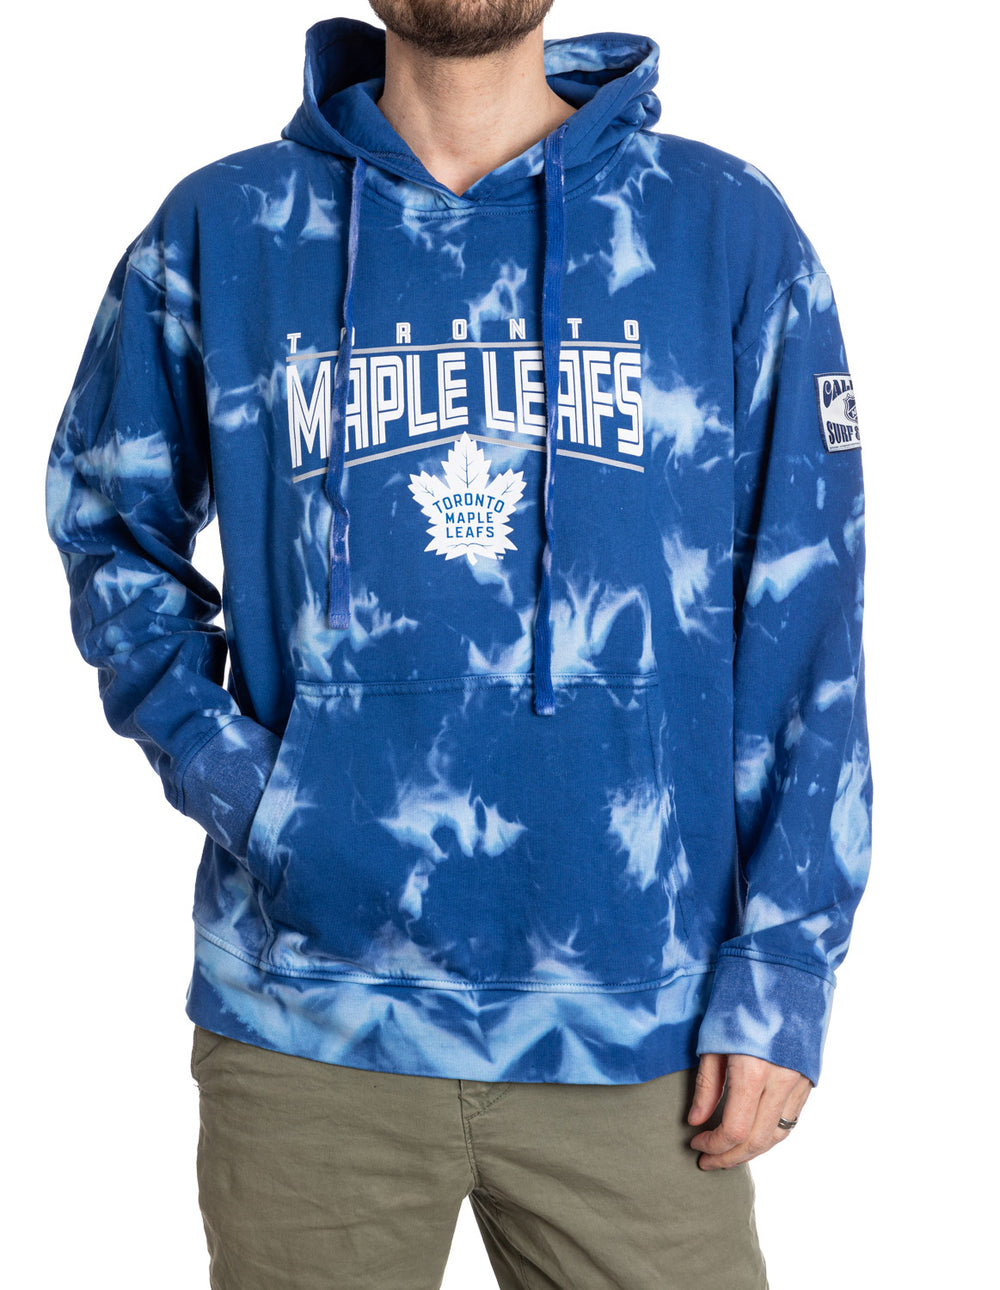 Maple Leafs Hoodie 3D Fight Cancer Pink Paisley Custom Toronto Maple Leafs  Gift - Personalized Gifts: Family, Sports, Occasions, Trending